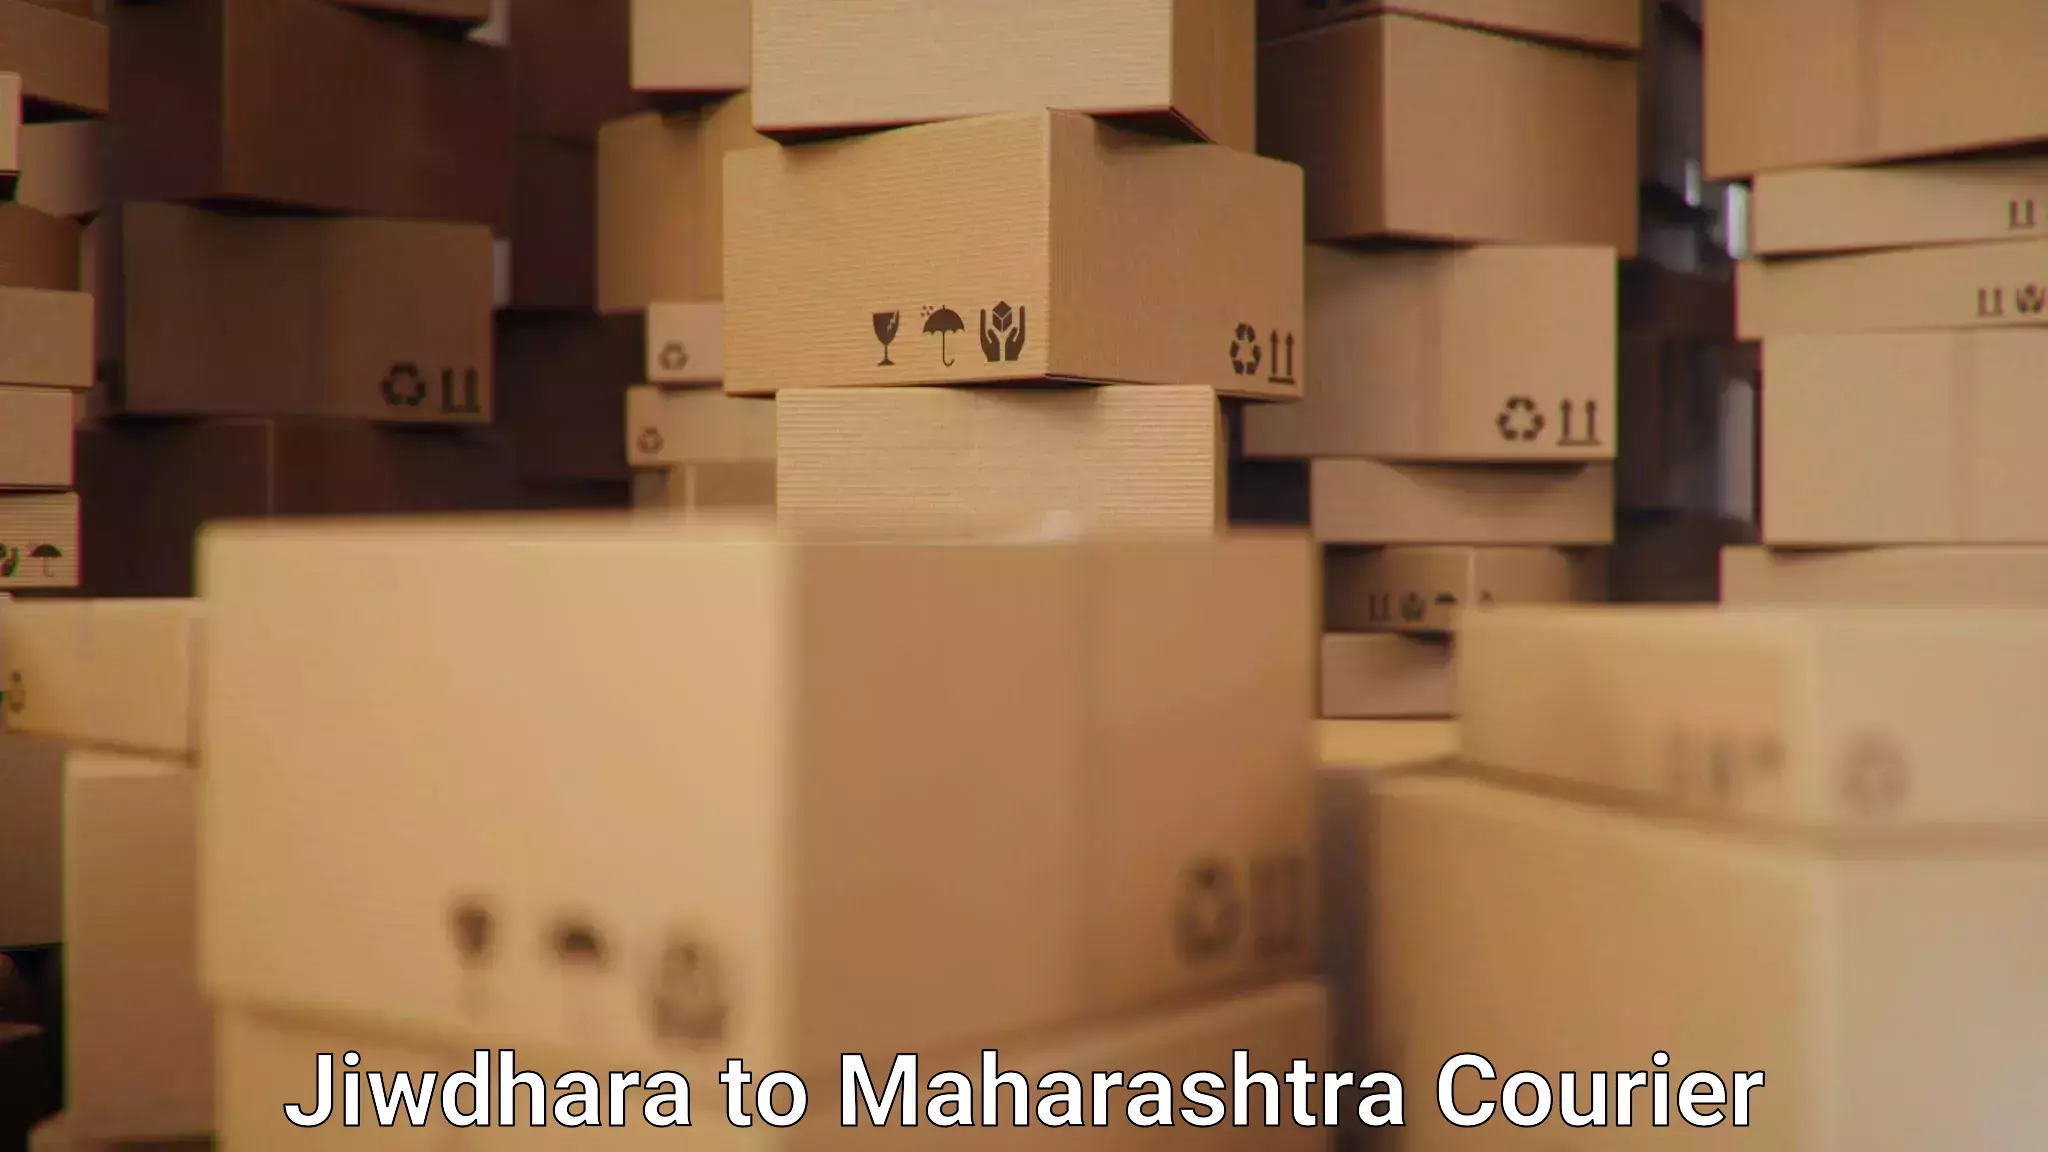 Courier services in Jiwdhara to Vasmat